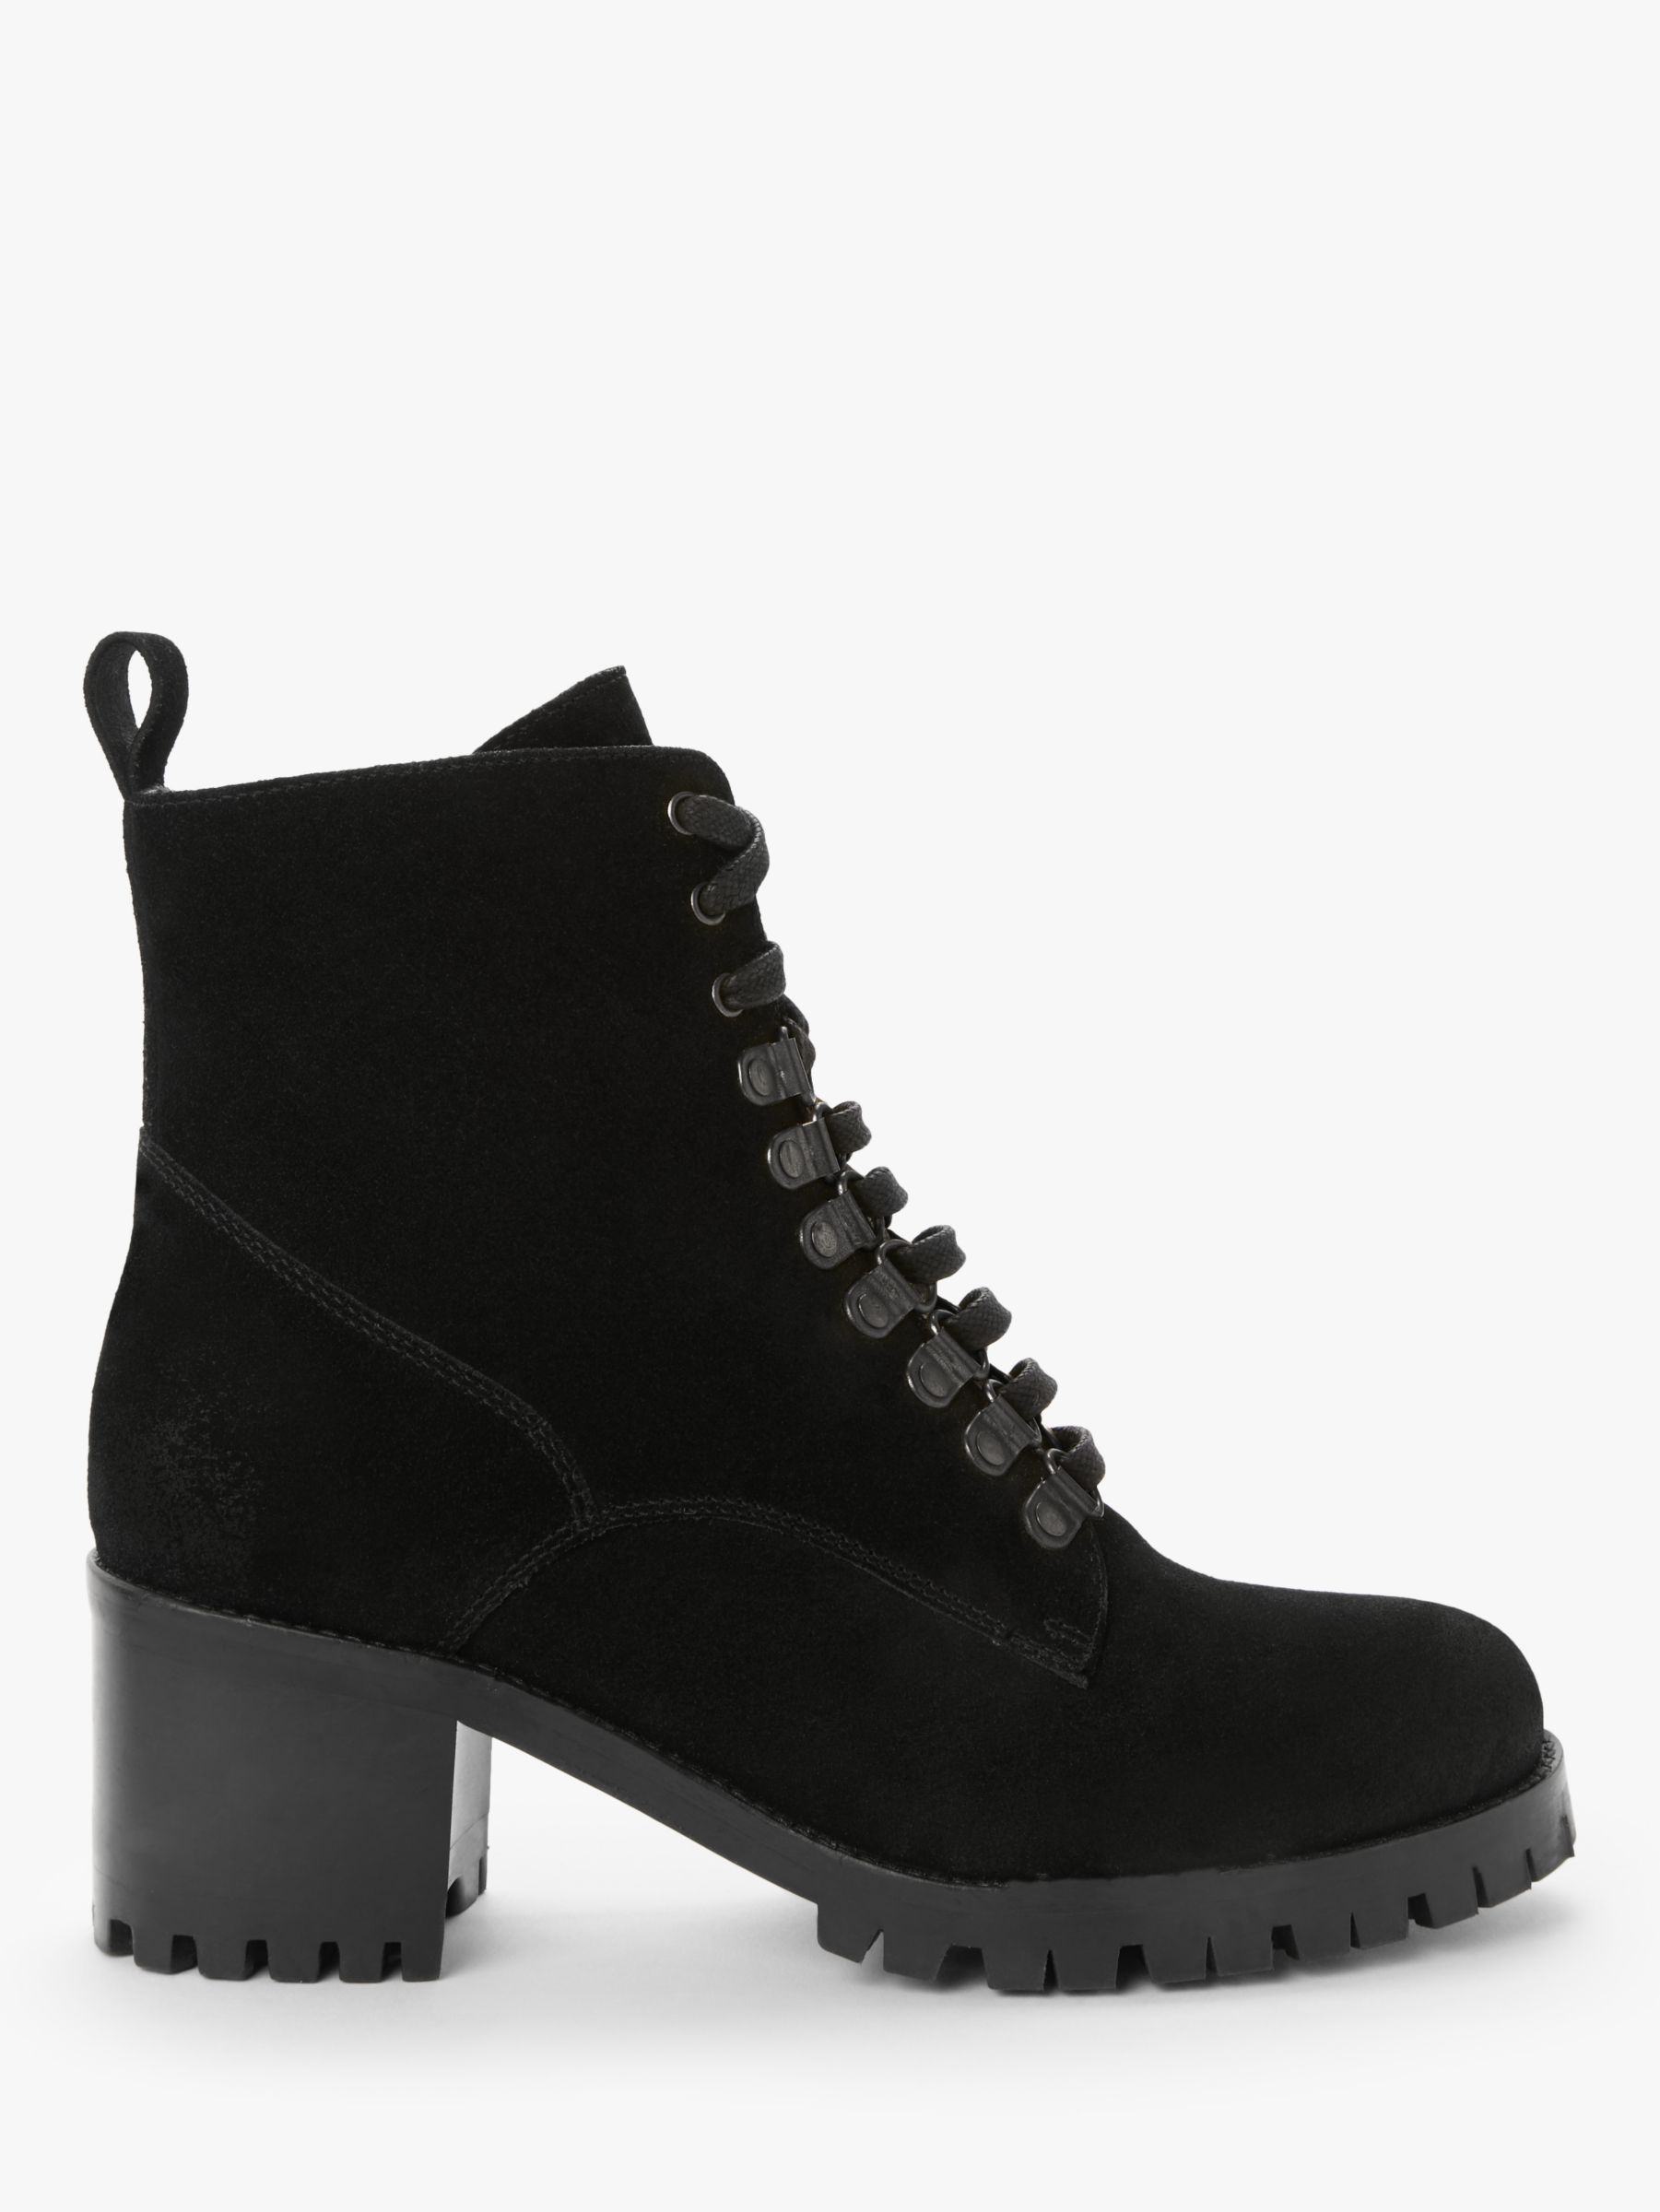 AND/OR Rubee Lace-Up Heeled Ankle Boots, Black